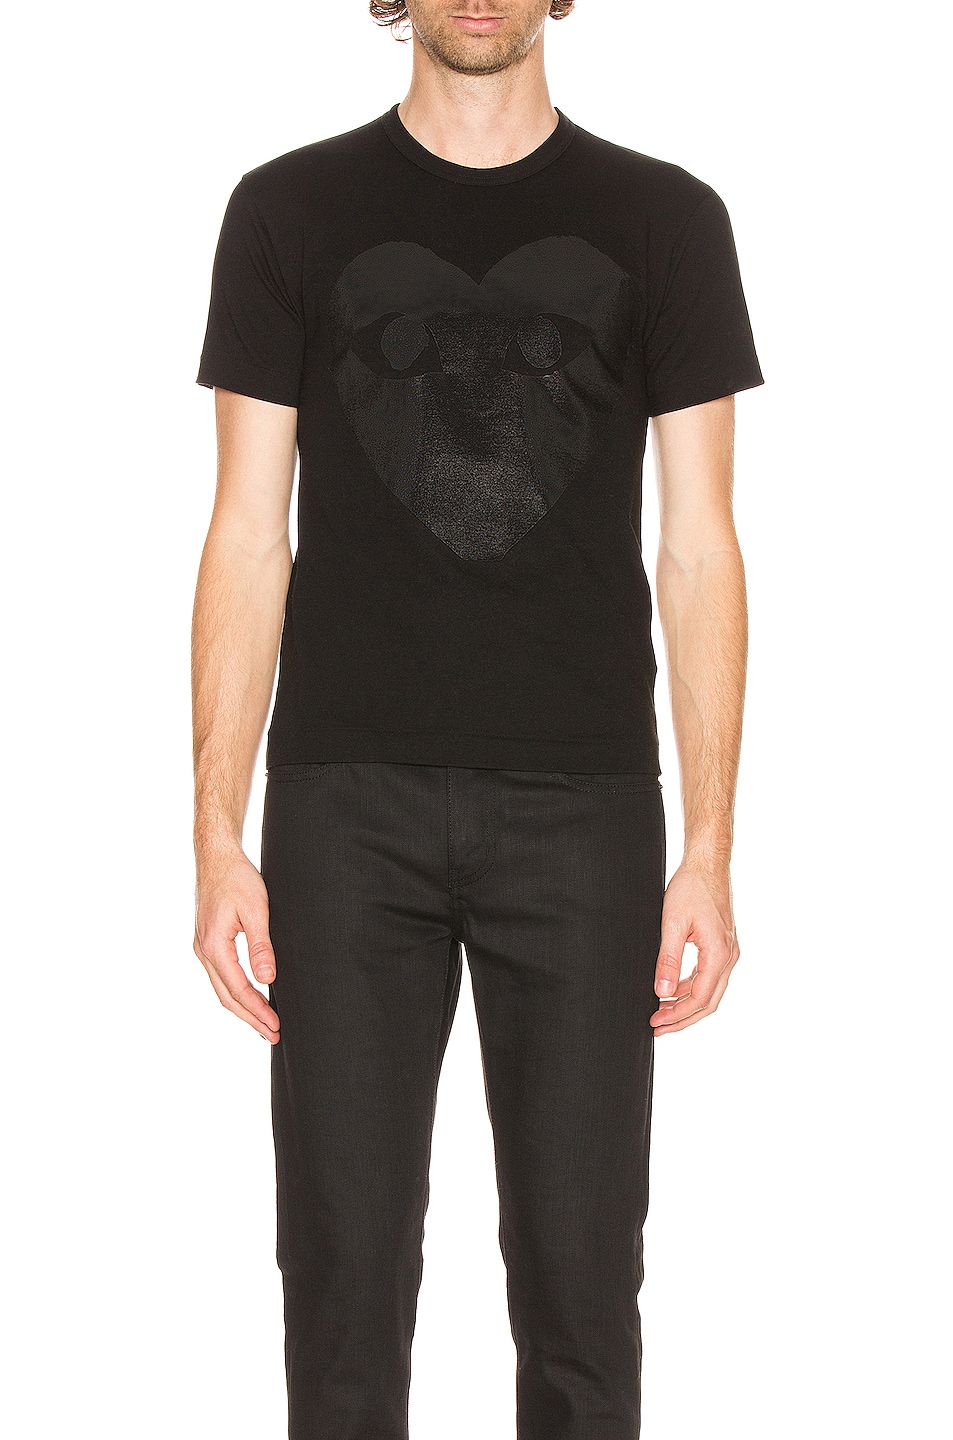 Comme Des Garcons PLAY Printed Heart Cotton Tee in Black | FWRD